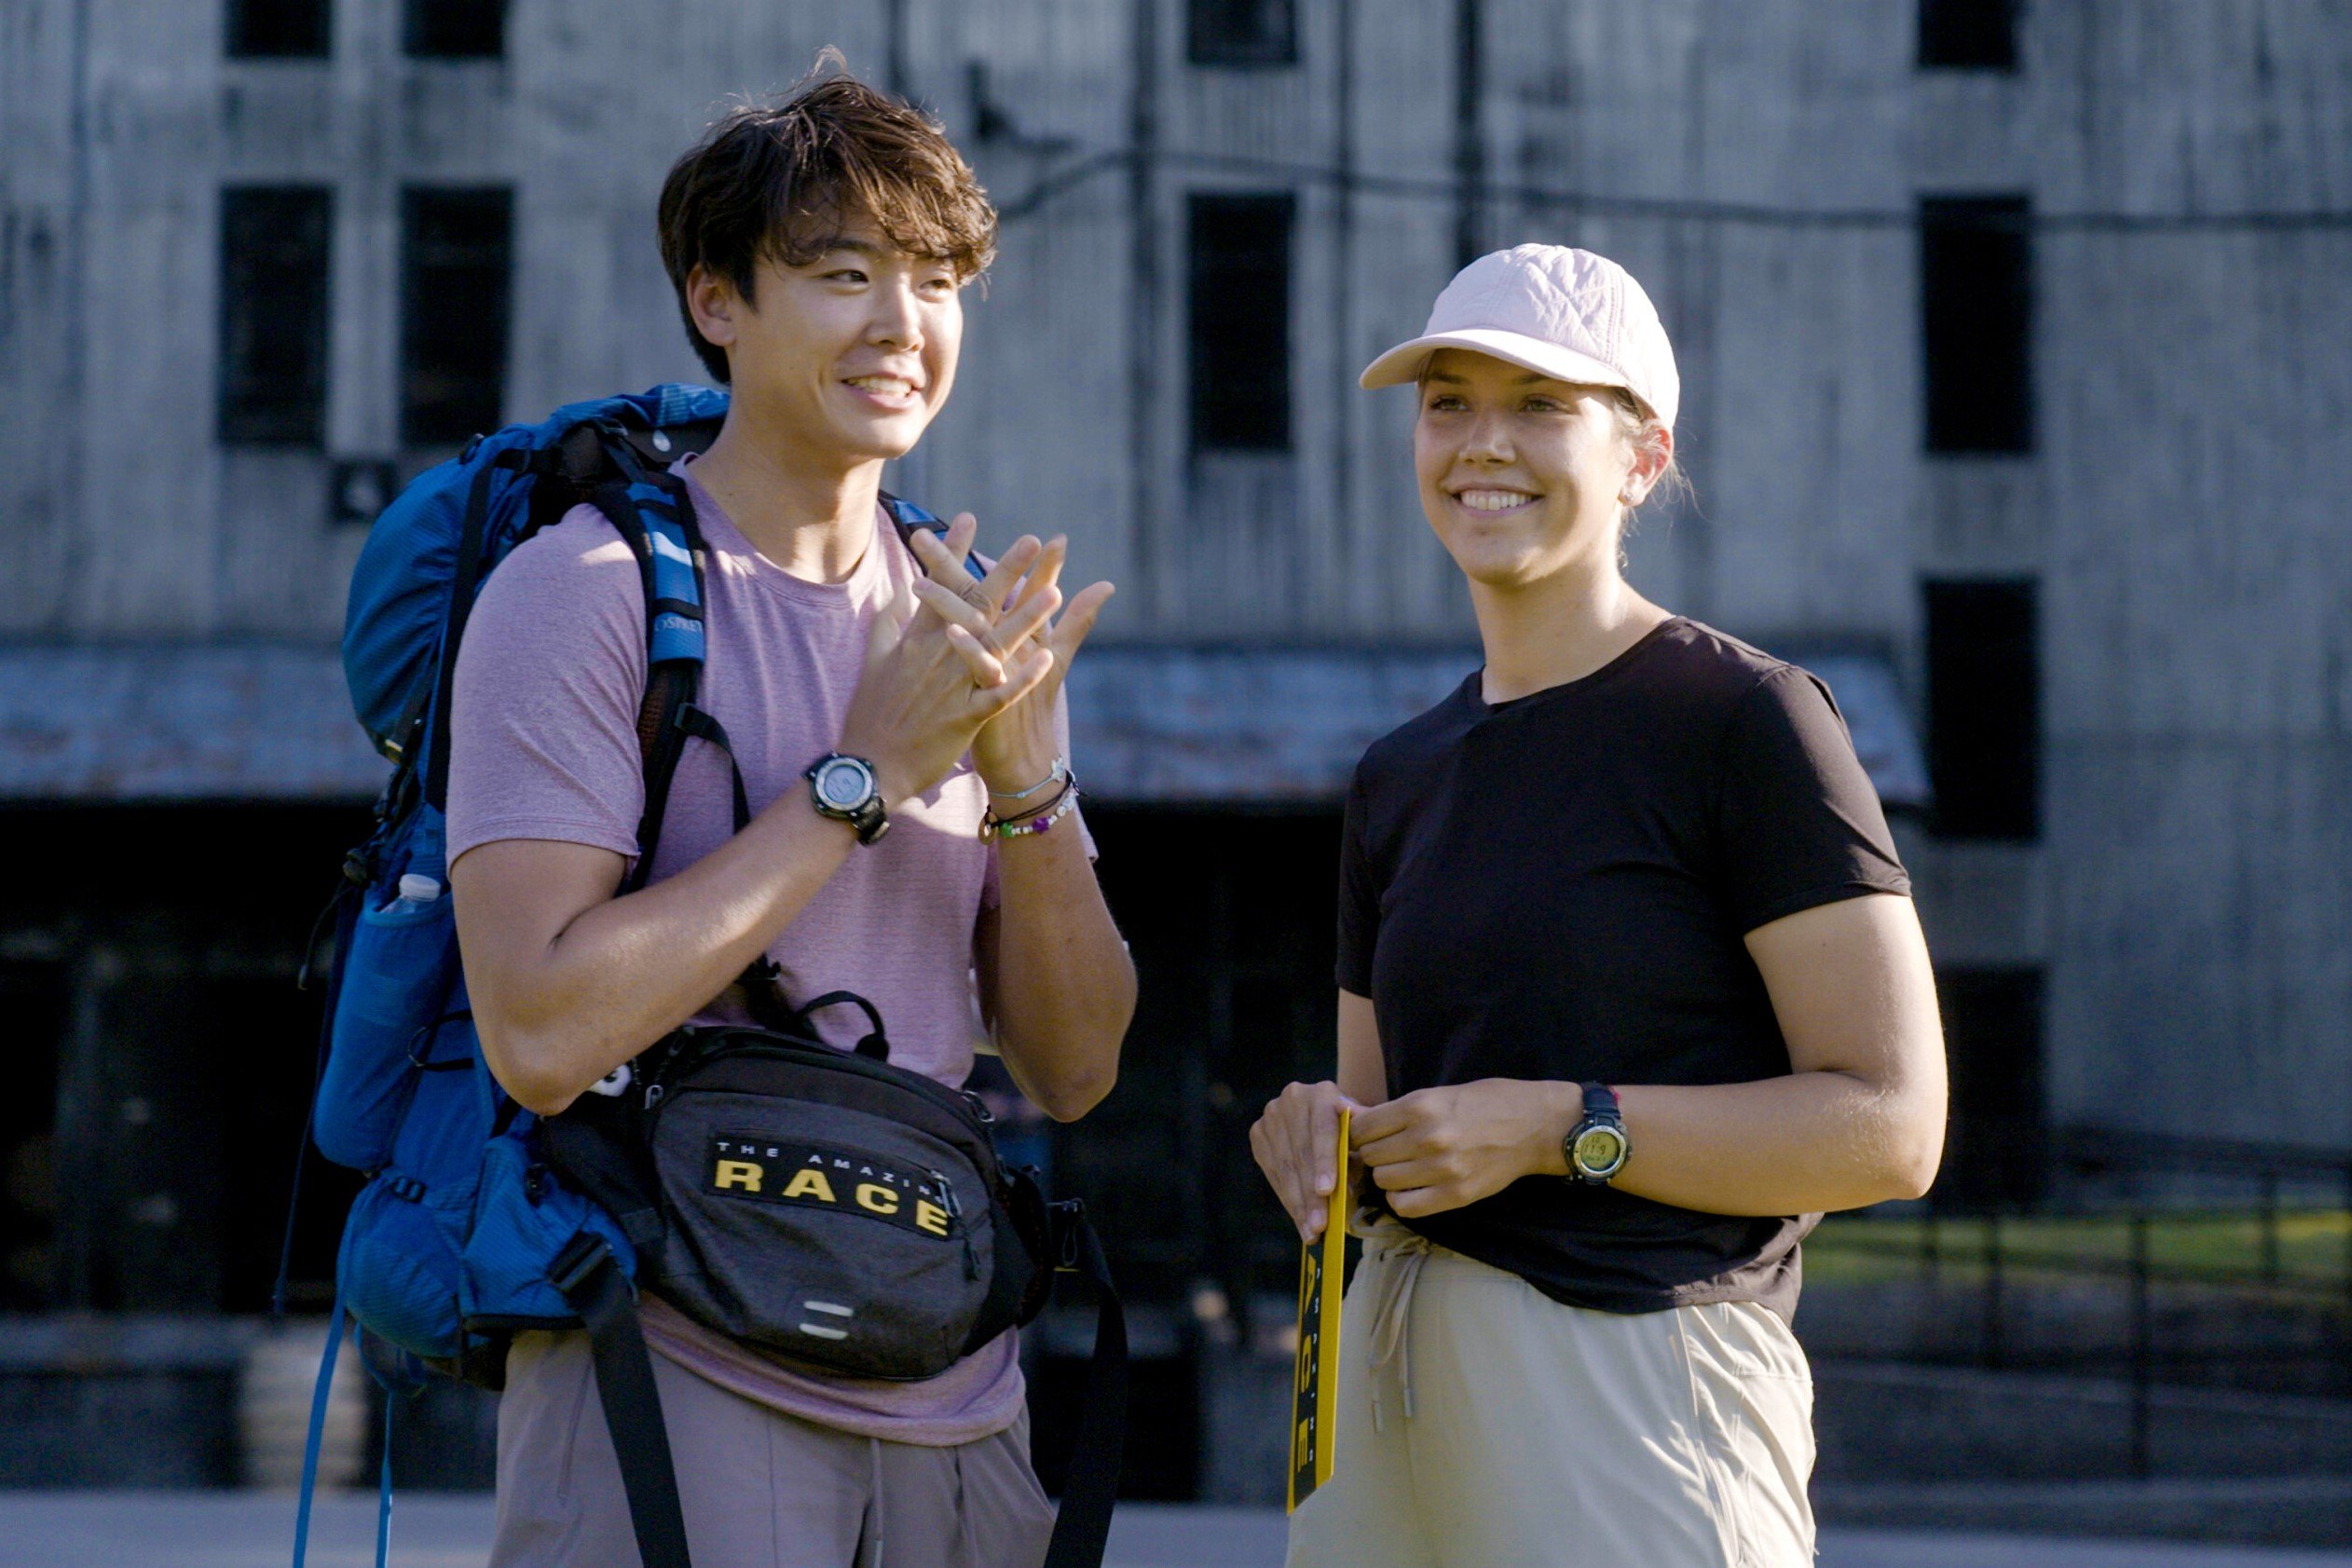 Derek Xiao and Claire Rehfuss, who, according to spoilers, made it to the finale of 'The Amazing Race 34' on CBS, read their first clue in the last leg. Derek wears a light purple shirt, light gray pants, a blue backpack, and a black 'The Amazing Race' fanny pack. Claire wears a black shirt, light gray pants, and a light pink baseball cap.